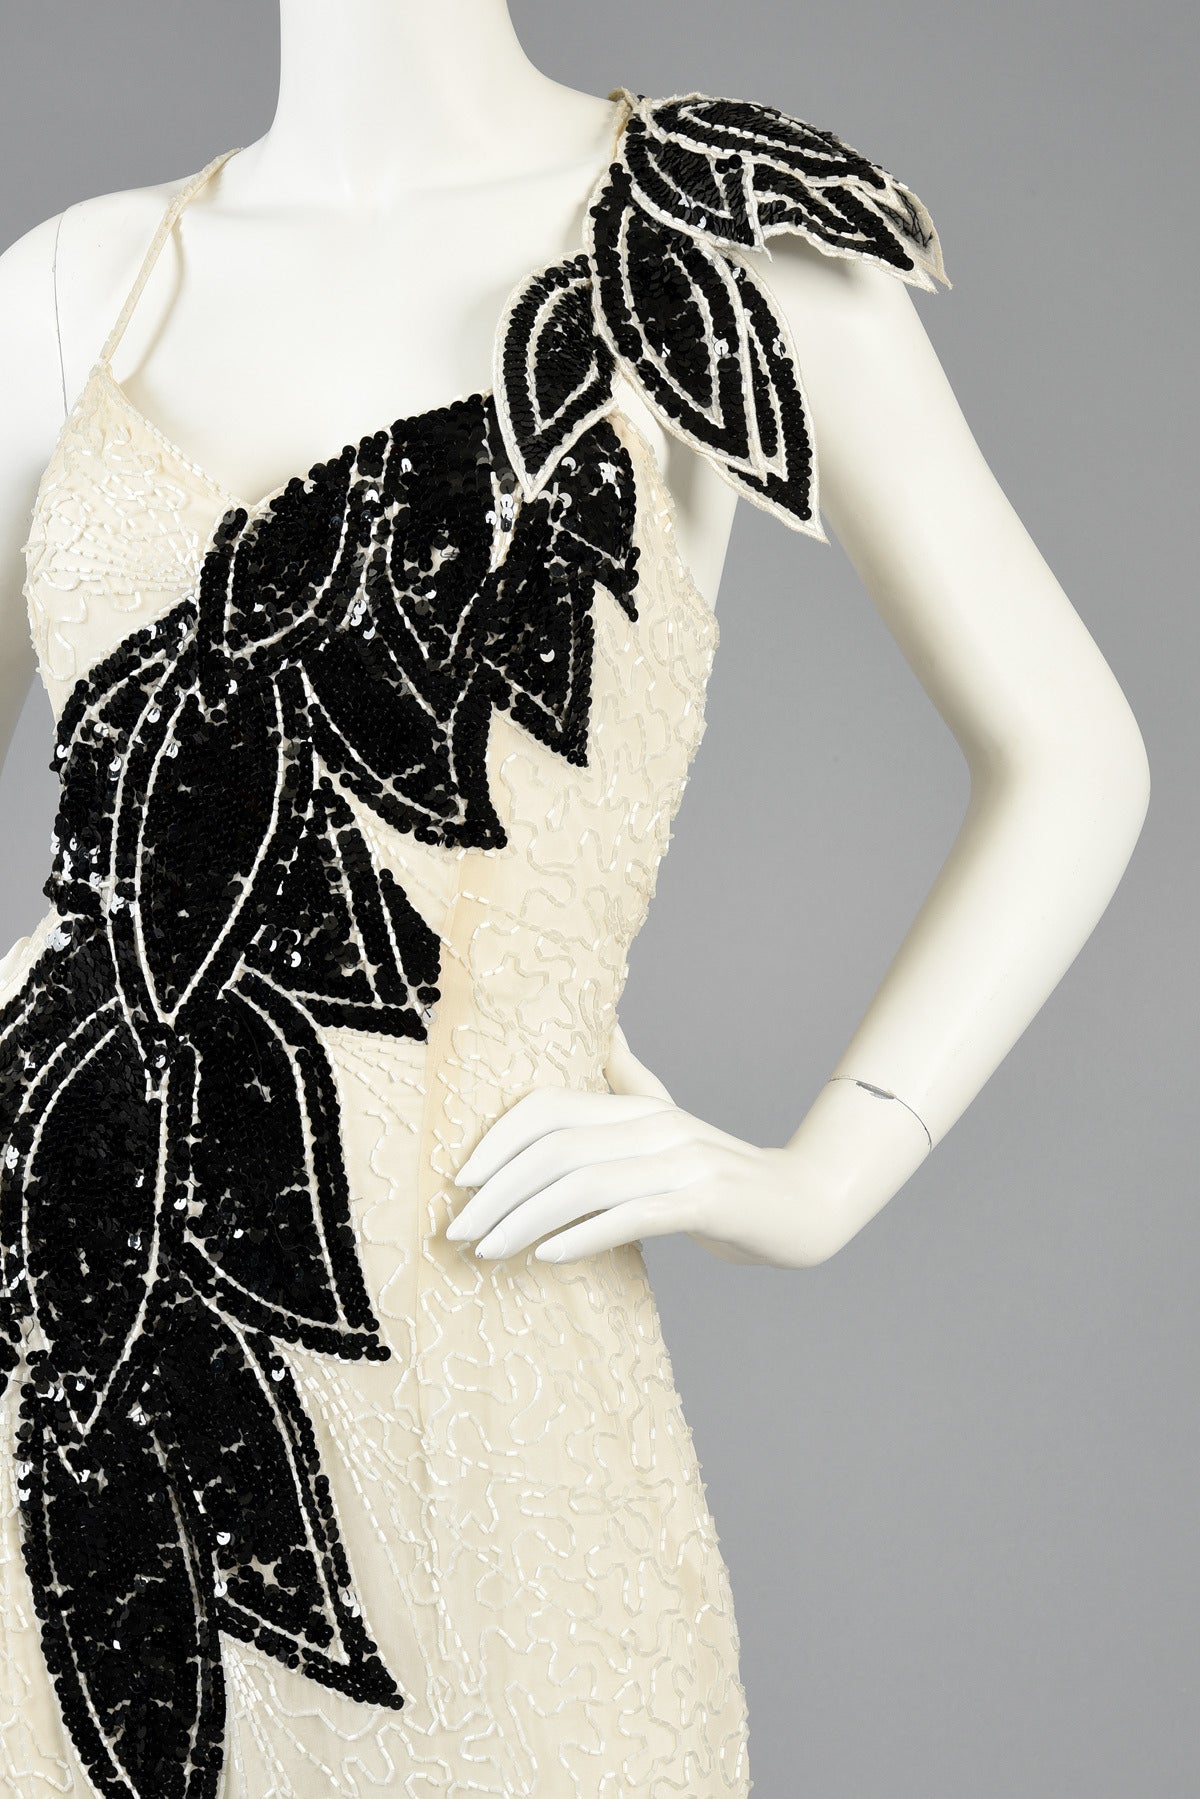 Lillie Rubin Black and White Beaded Gown with Architectural Leaves In Excellent Condition For Sale In Yucca Valley, CA